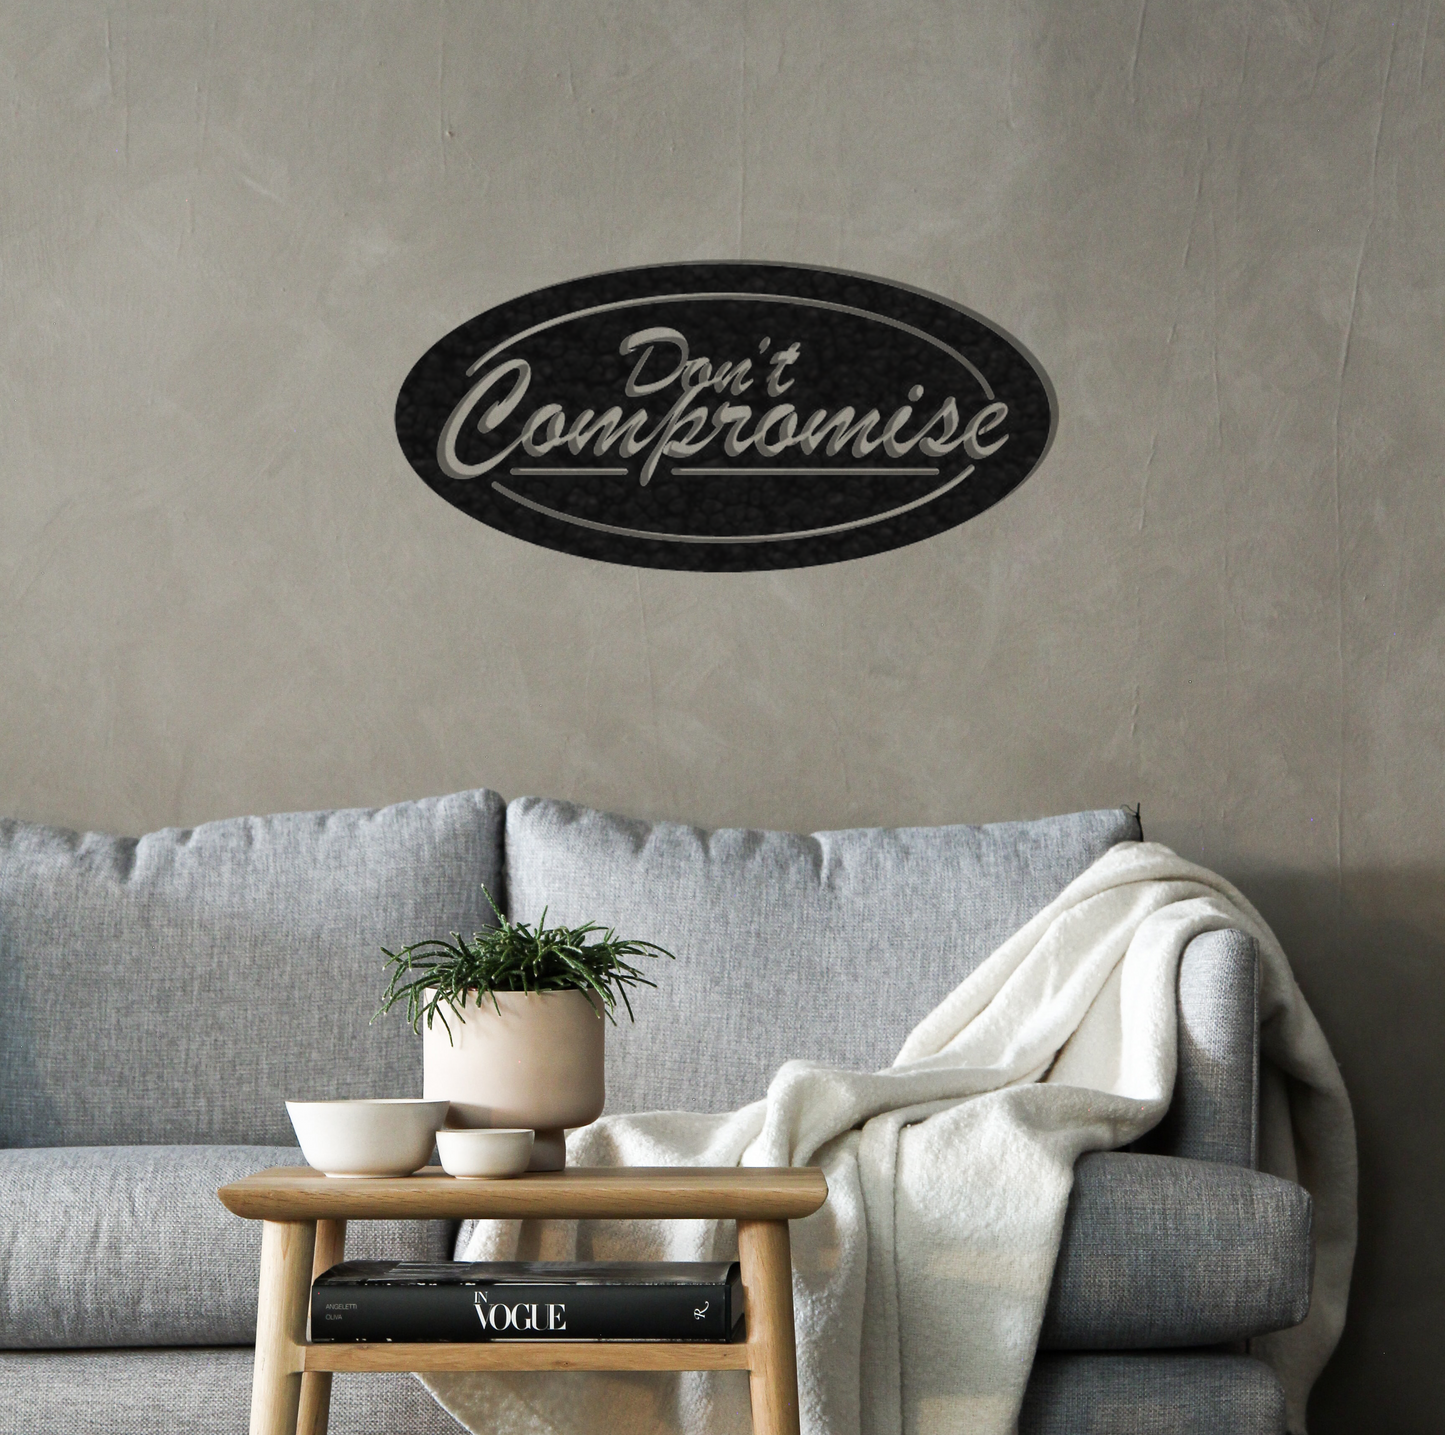 Don't Compromise - Metal Wall Art